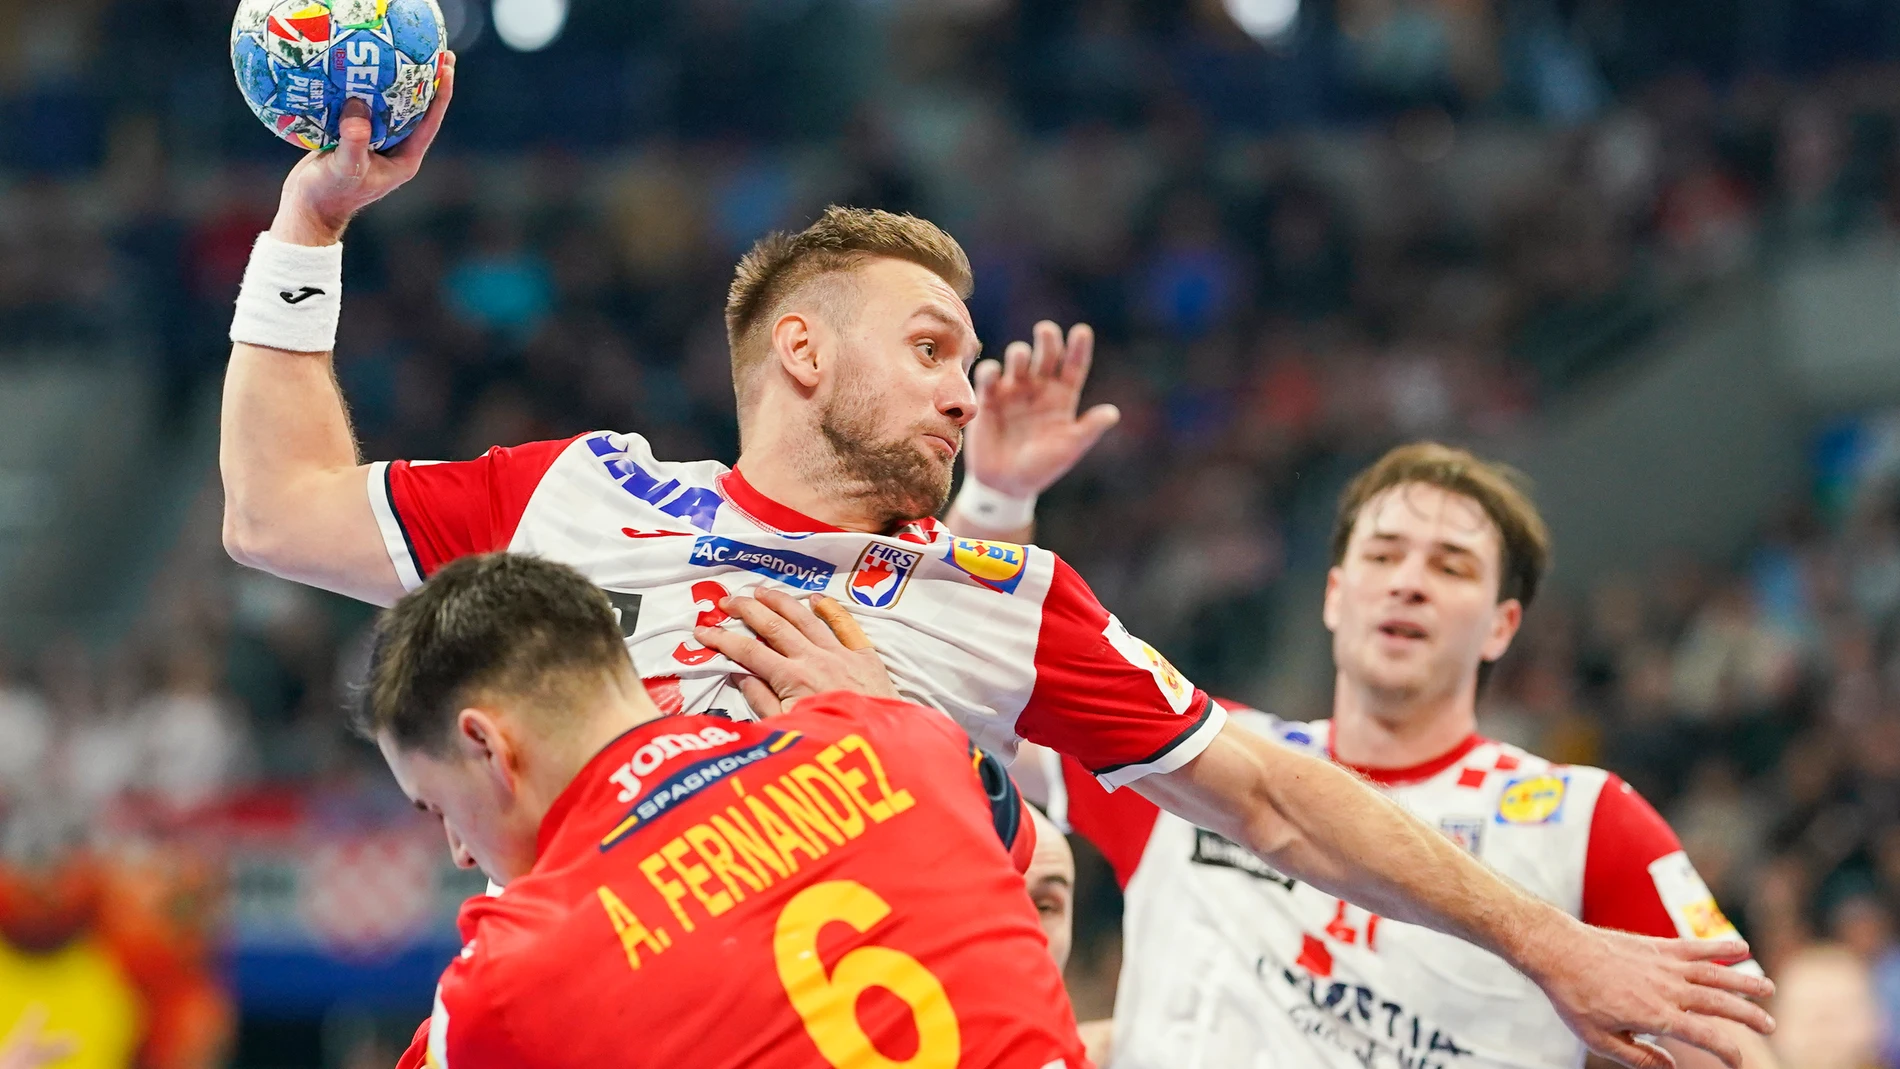 Croatia's Luka Cindric, center, battles for the ball with Spain's Angel Fernandez Perez during the Handball European Championship preliminary round match between Spain and Croatia at the SAP Arena in Mannheim, Germany, Friday, Jan. 12, 2024. (Uwe Anspach/dpa via AP)